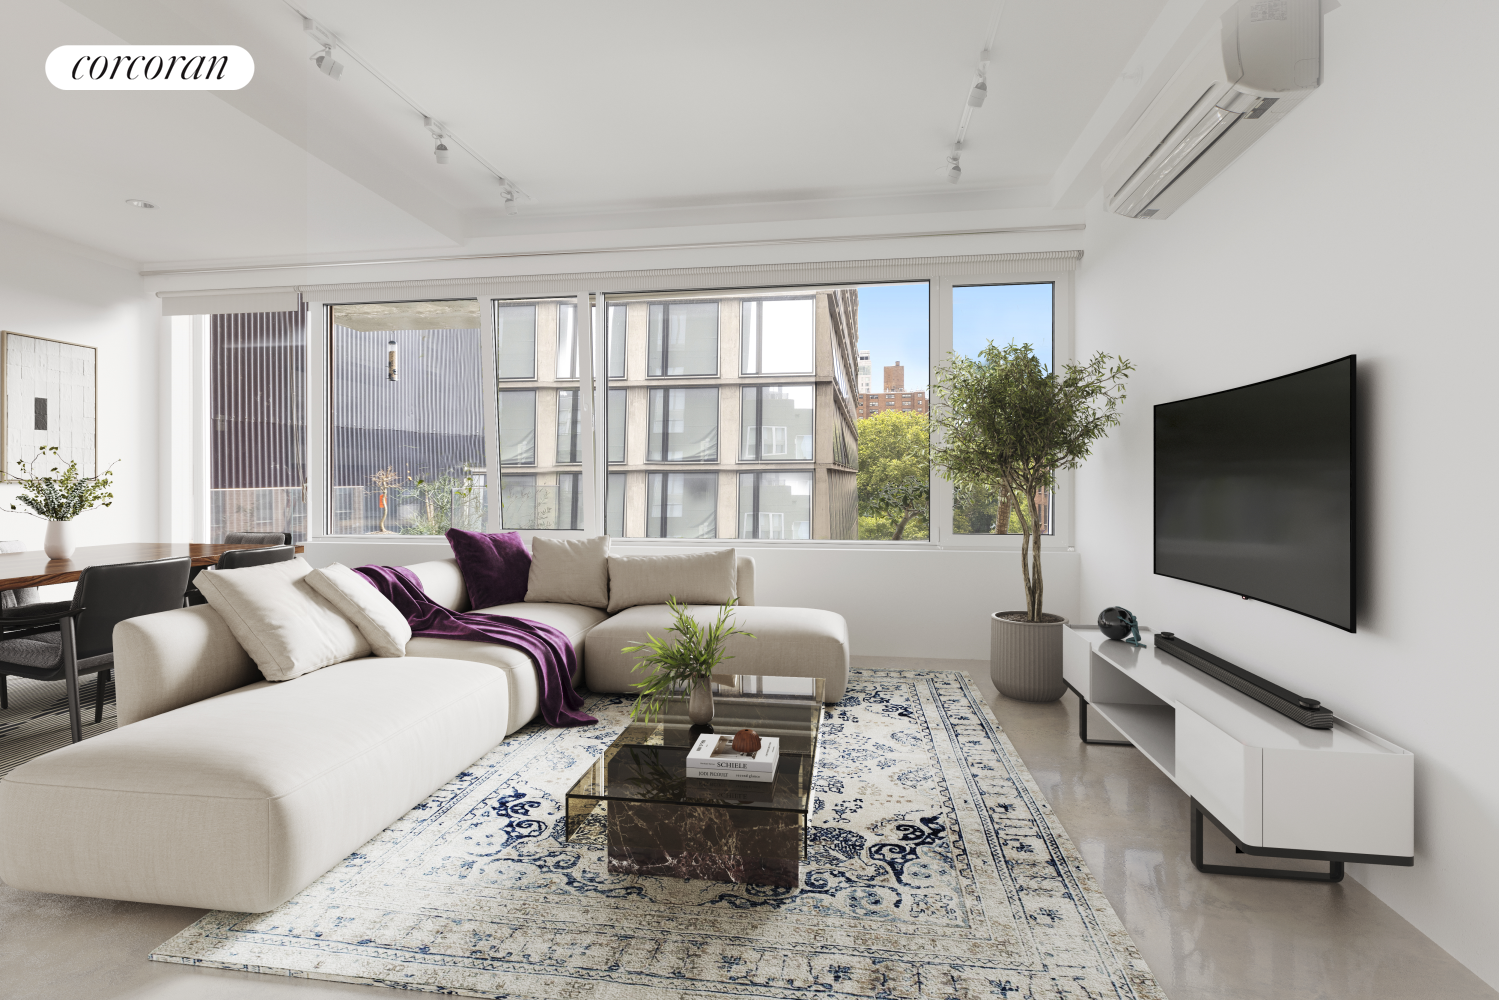 255 Bowery 5, Lower East Side, Downtown, NYC - 2 Bedrooms  
2 Bathrooms  
5 Rooms - 